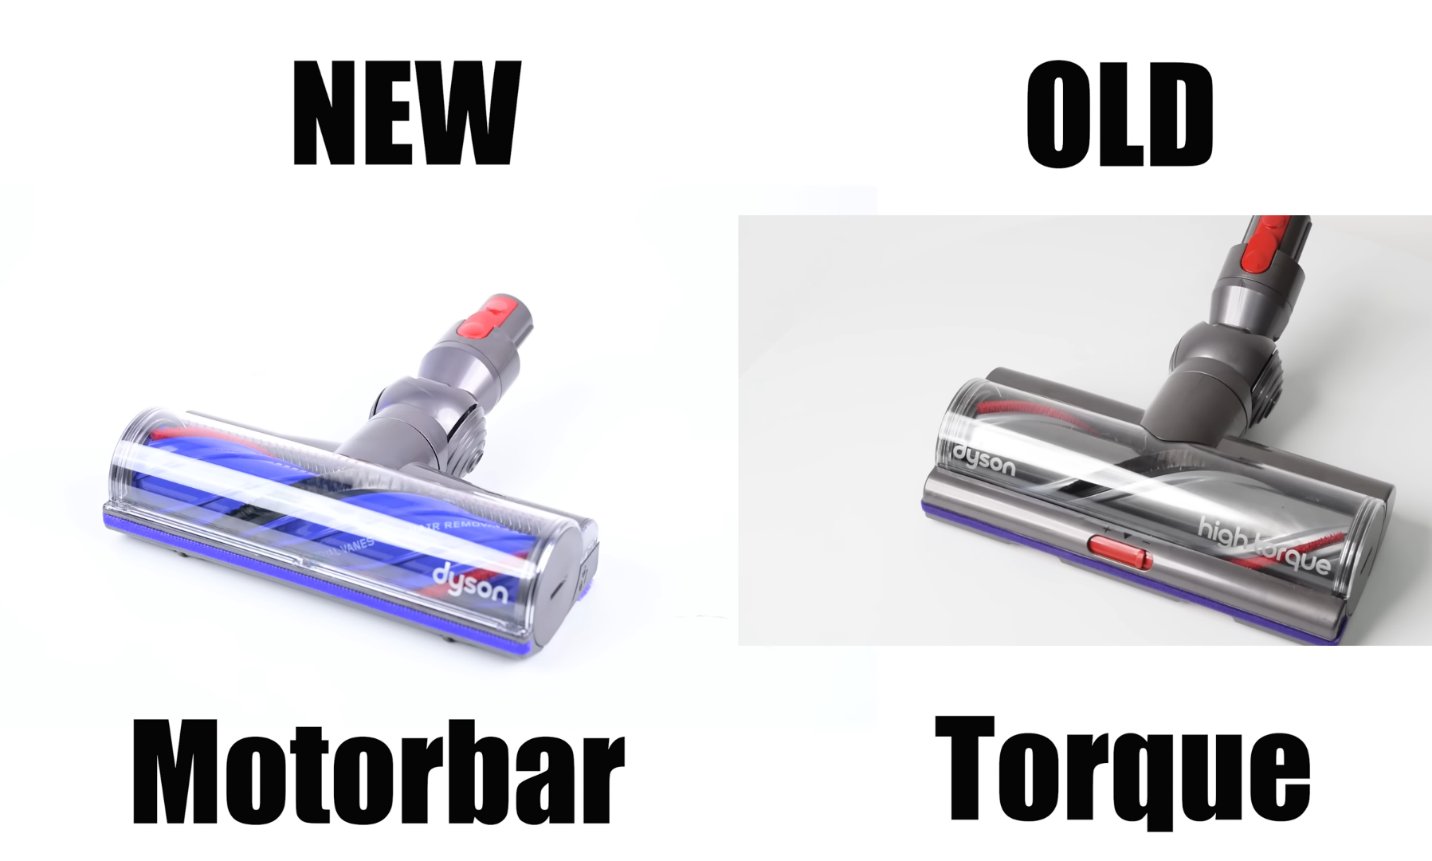 Comparison image showing the new Motorbar cleaner head next to the older Torque drive head, highlighting design advancements in the Dyson V11